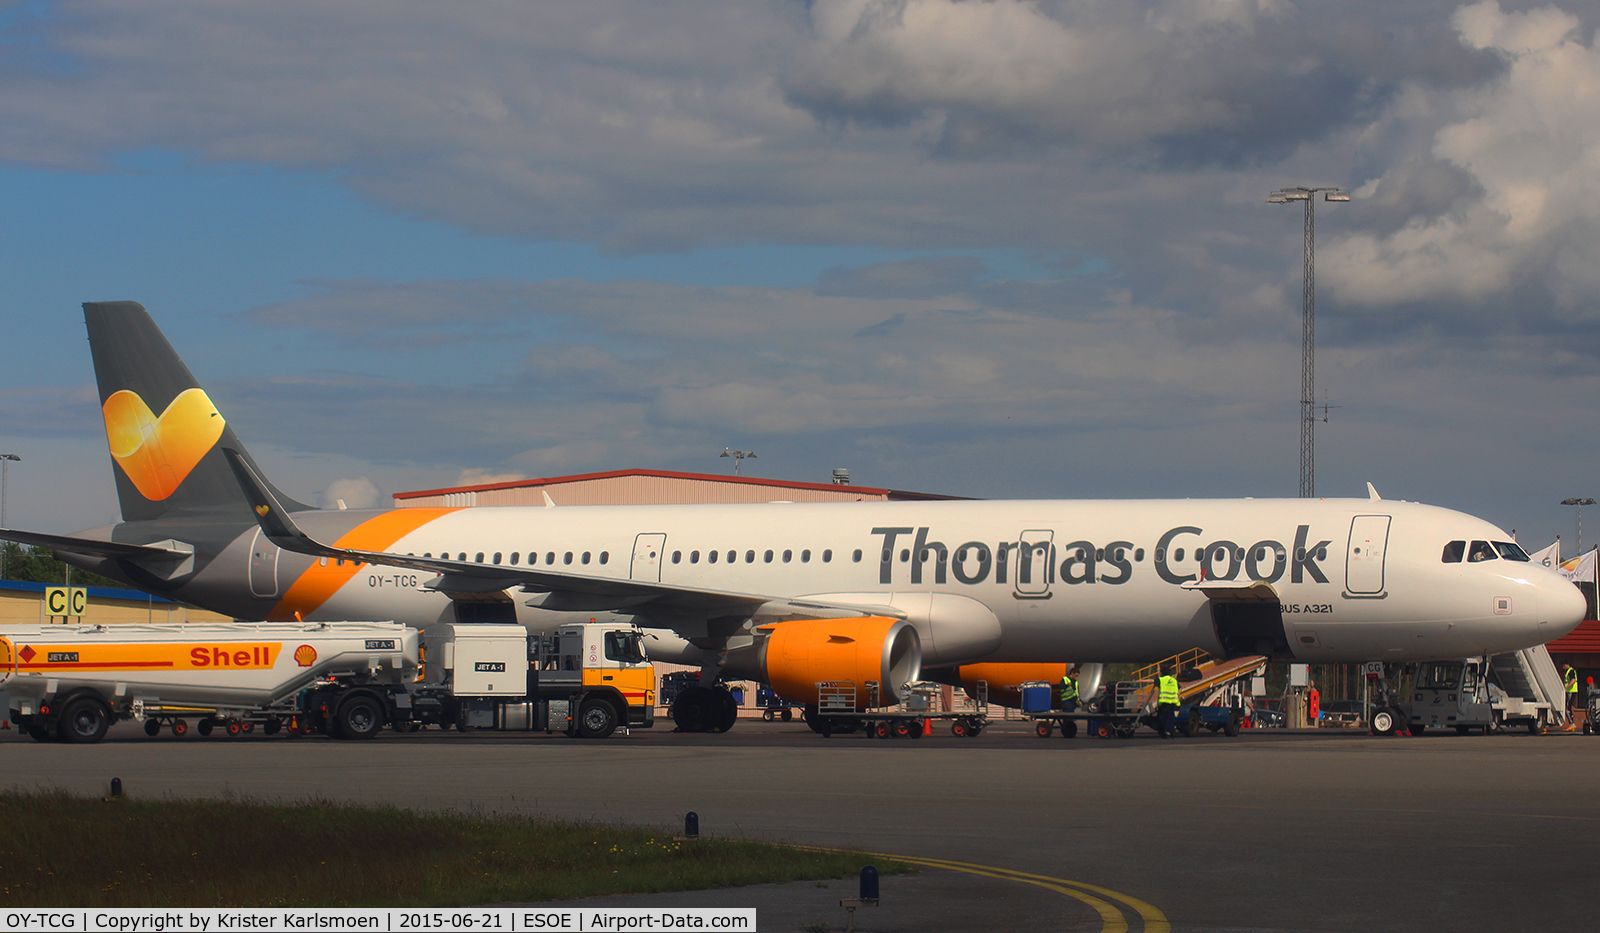 OY-TCG, 2014 Airbus A321-211 C/N 6389, Todays charter :-)